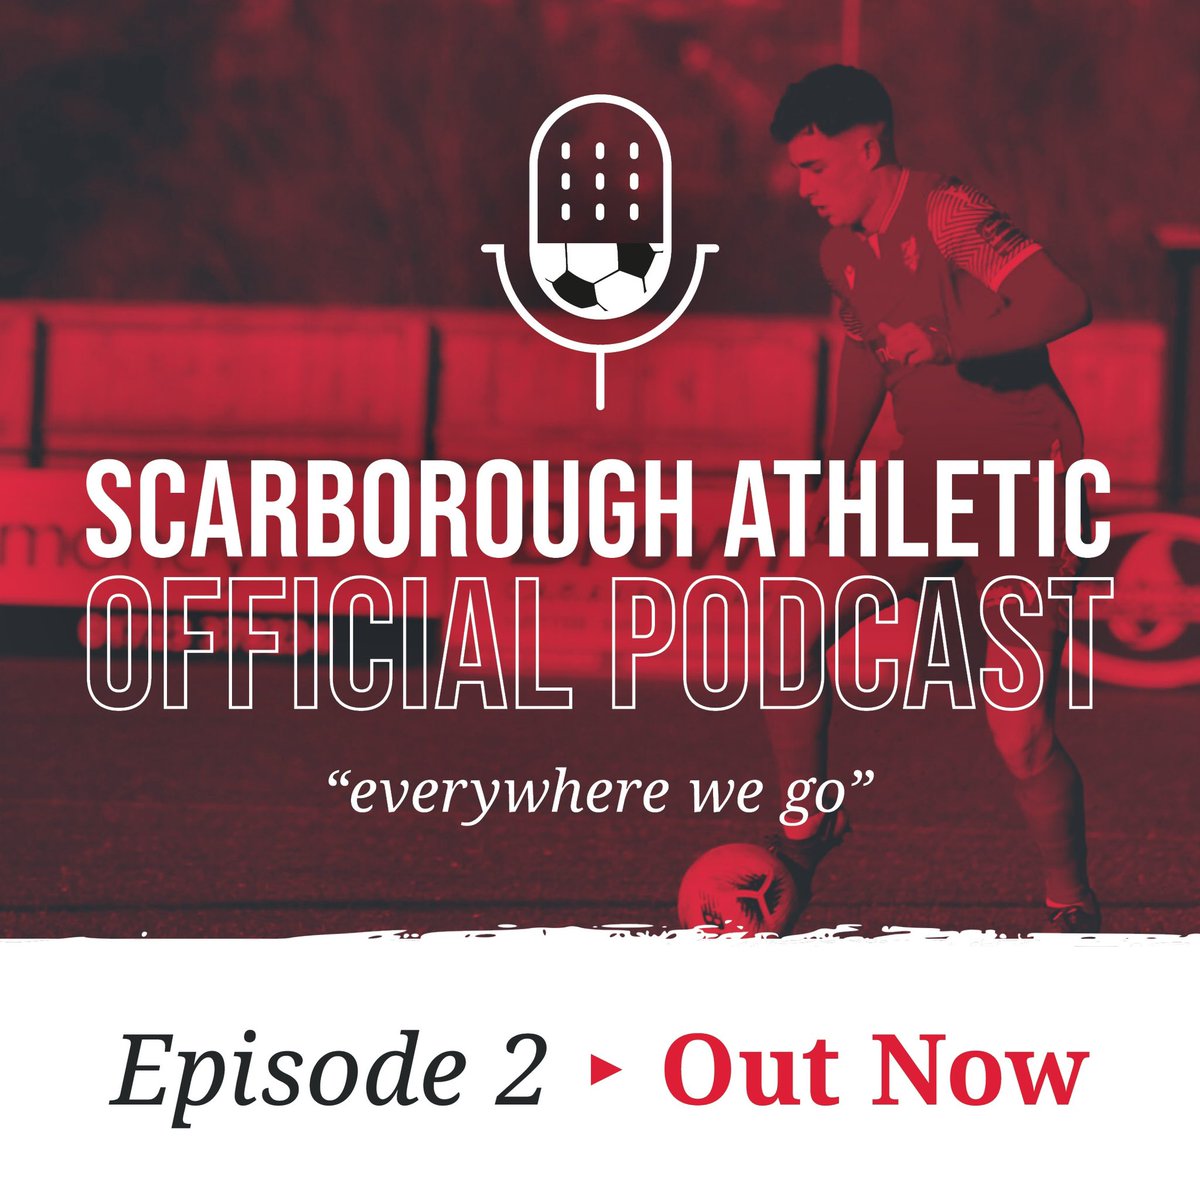 🚨Exciting news for all Scarborough Athletic fans! Episode 2 of the official SAFC podcast is OUT NOW!🎉 Get ready to hear Dom Tear spill the tea about his football journey and his thoughts on all things SAFC!👀 Don't miss out, tune in now!🎧⚽ anchor.fm/scarboroughafc… #SAFC